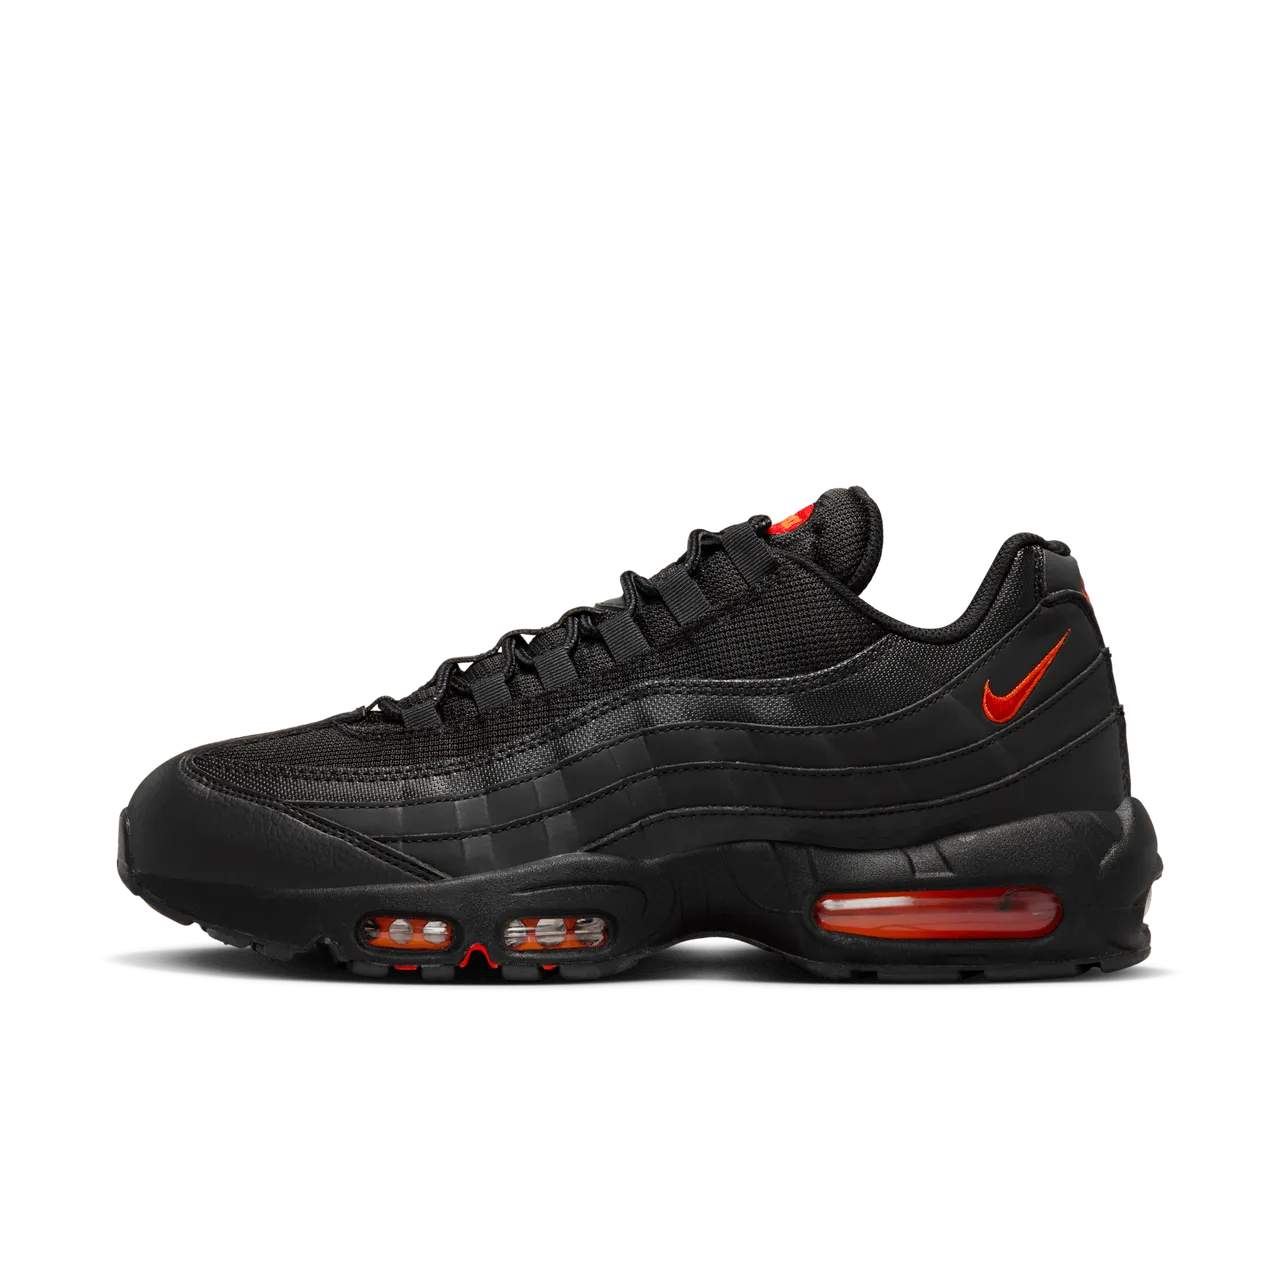 Nike Air Max 95 Men's Shoes - Black - Leather